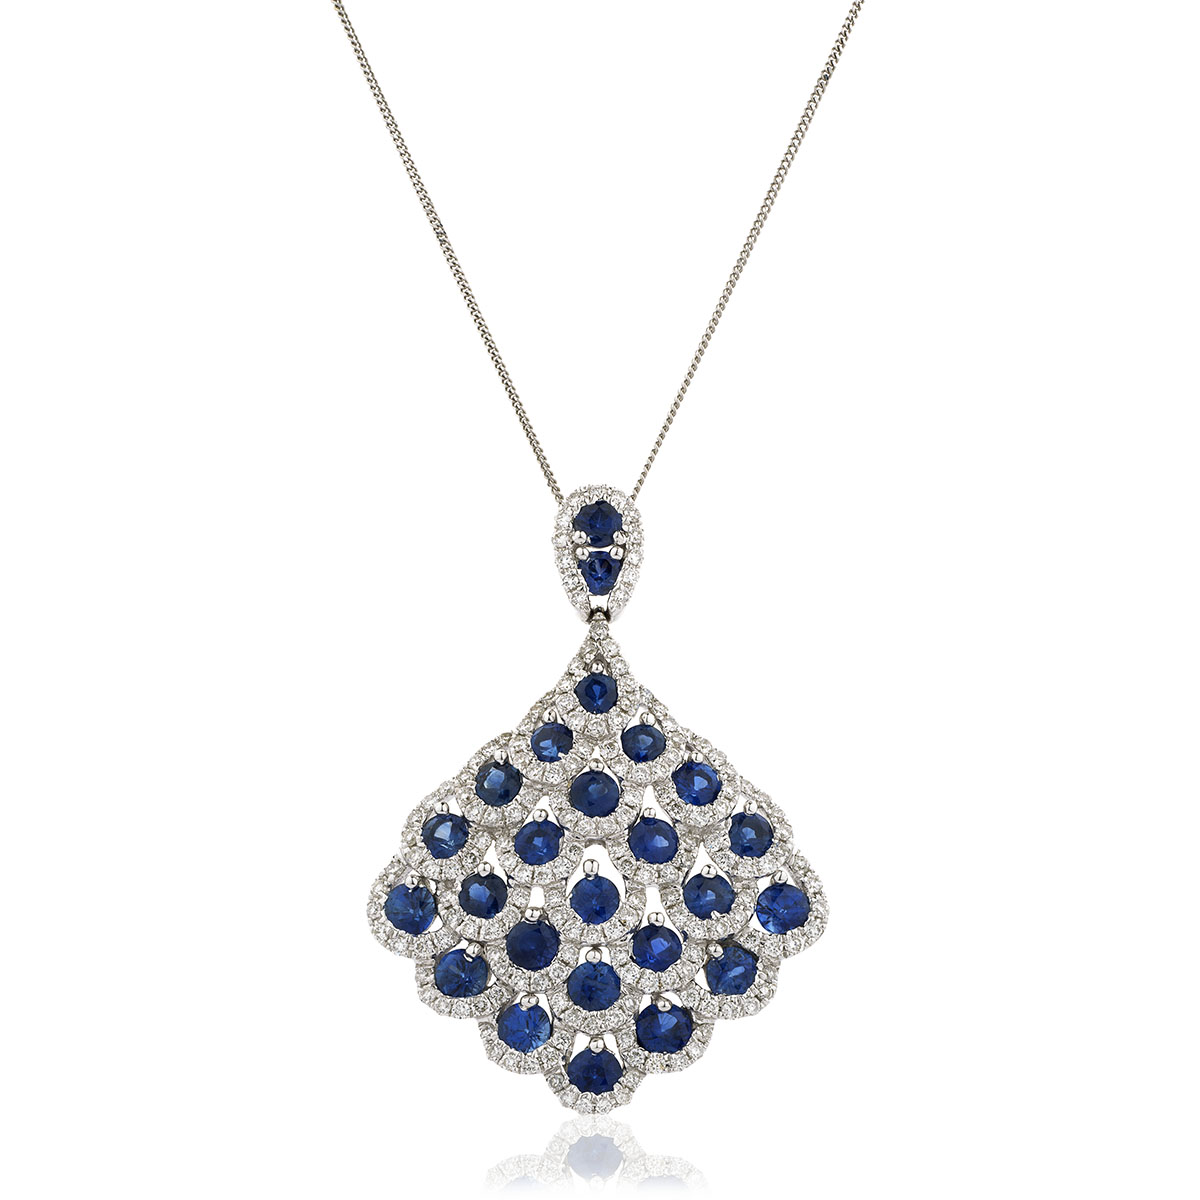 Peacock Tail Diamond and Blue Sapphire Necklace